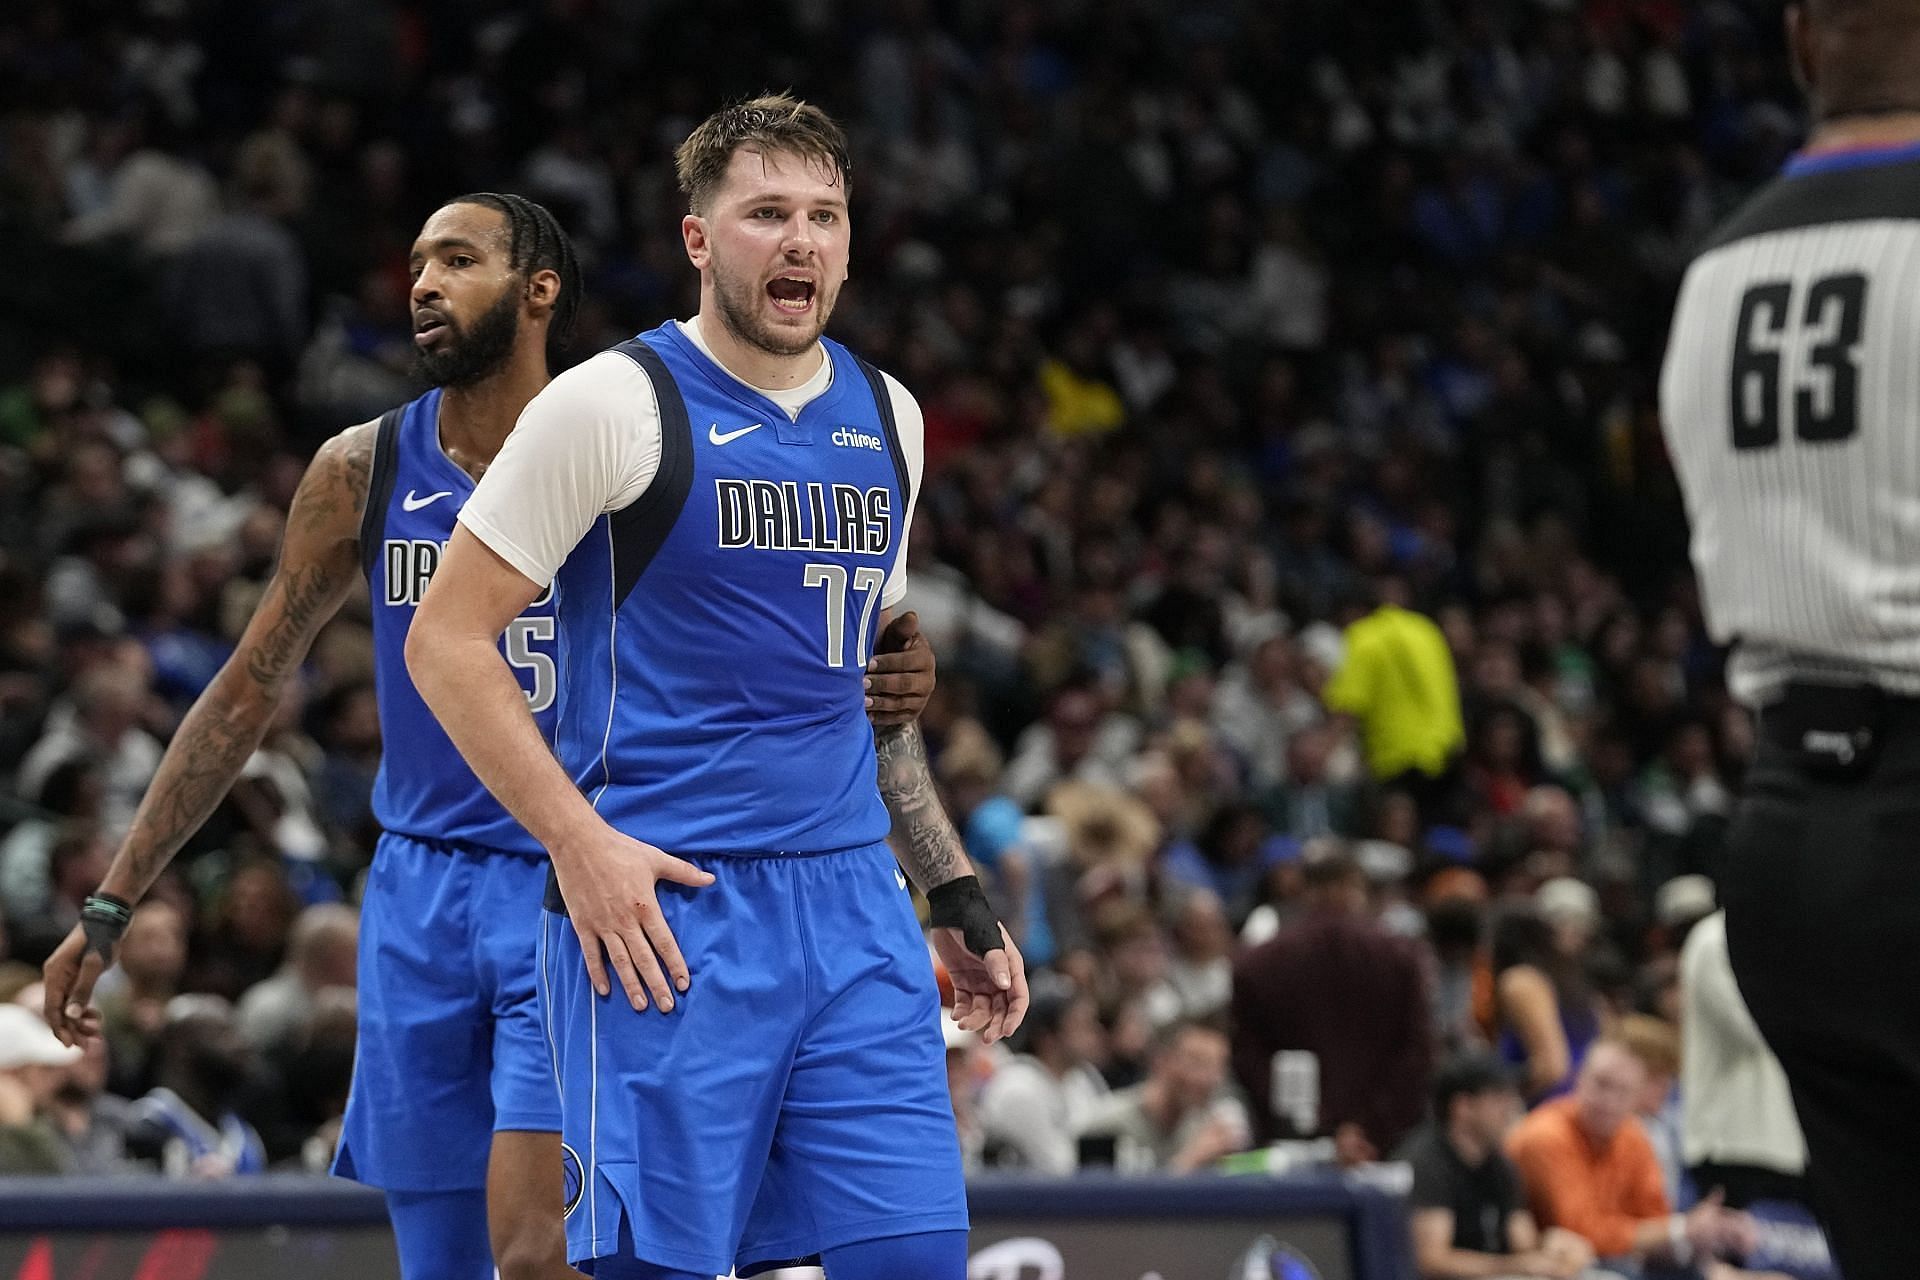 Luka Doncic sinks a deep 3 to become 6th youngest and 7th fastest player to 10,000 NBA career points